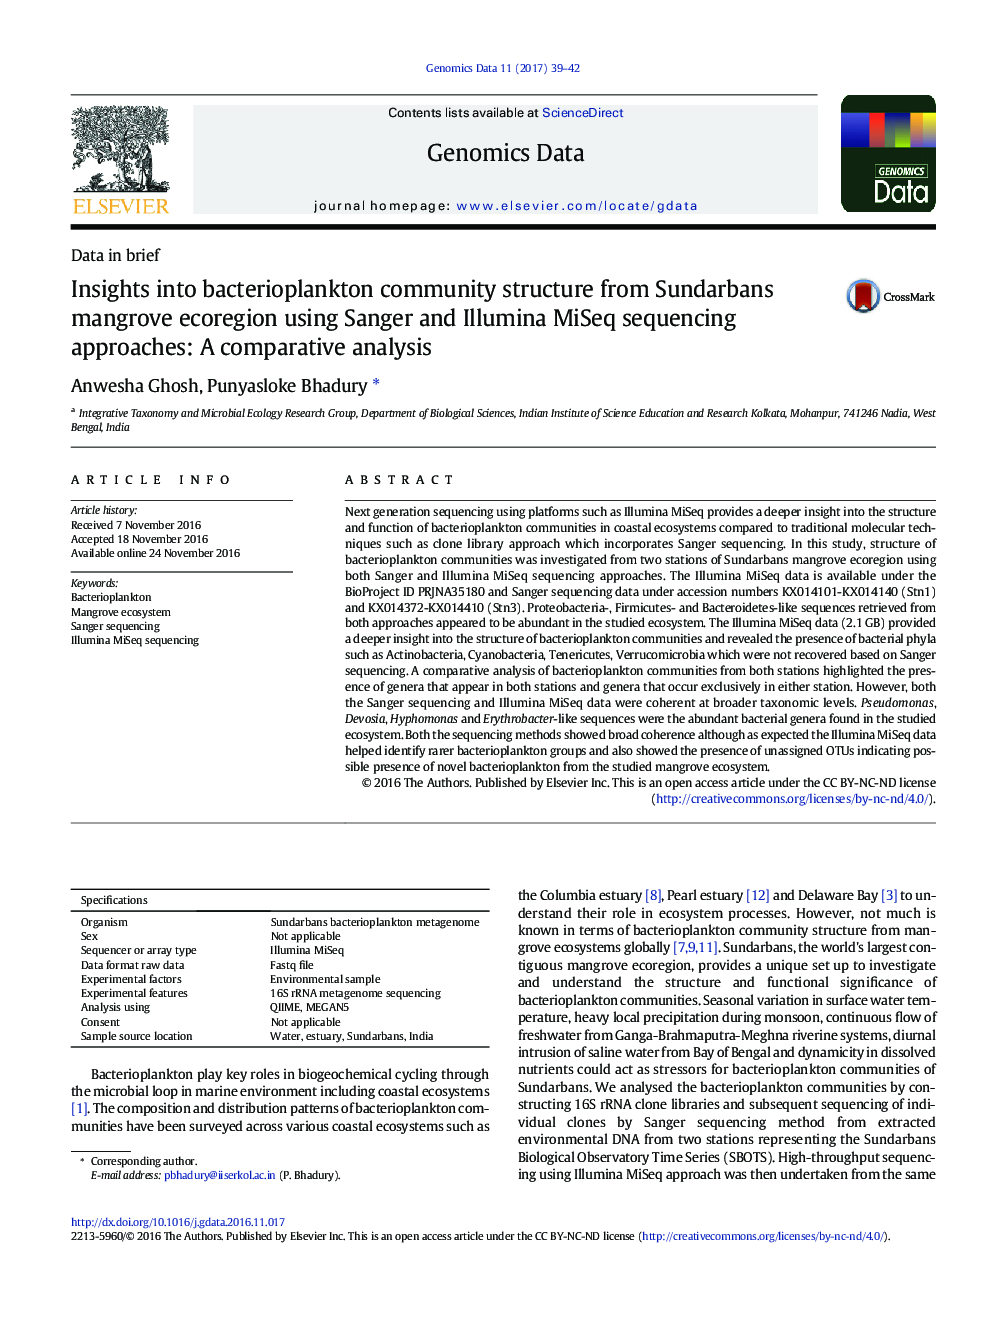 Insights into bacterioplankton community structure from Sundarbans mangrove ecoregion using Sanger and Illumina MiSeq sequencing approaches: A comparative analysis